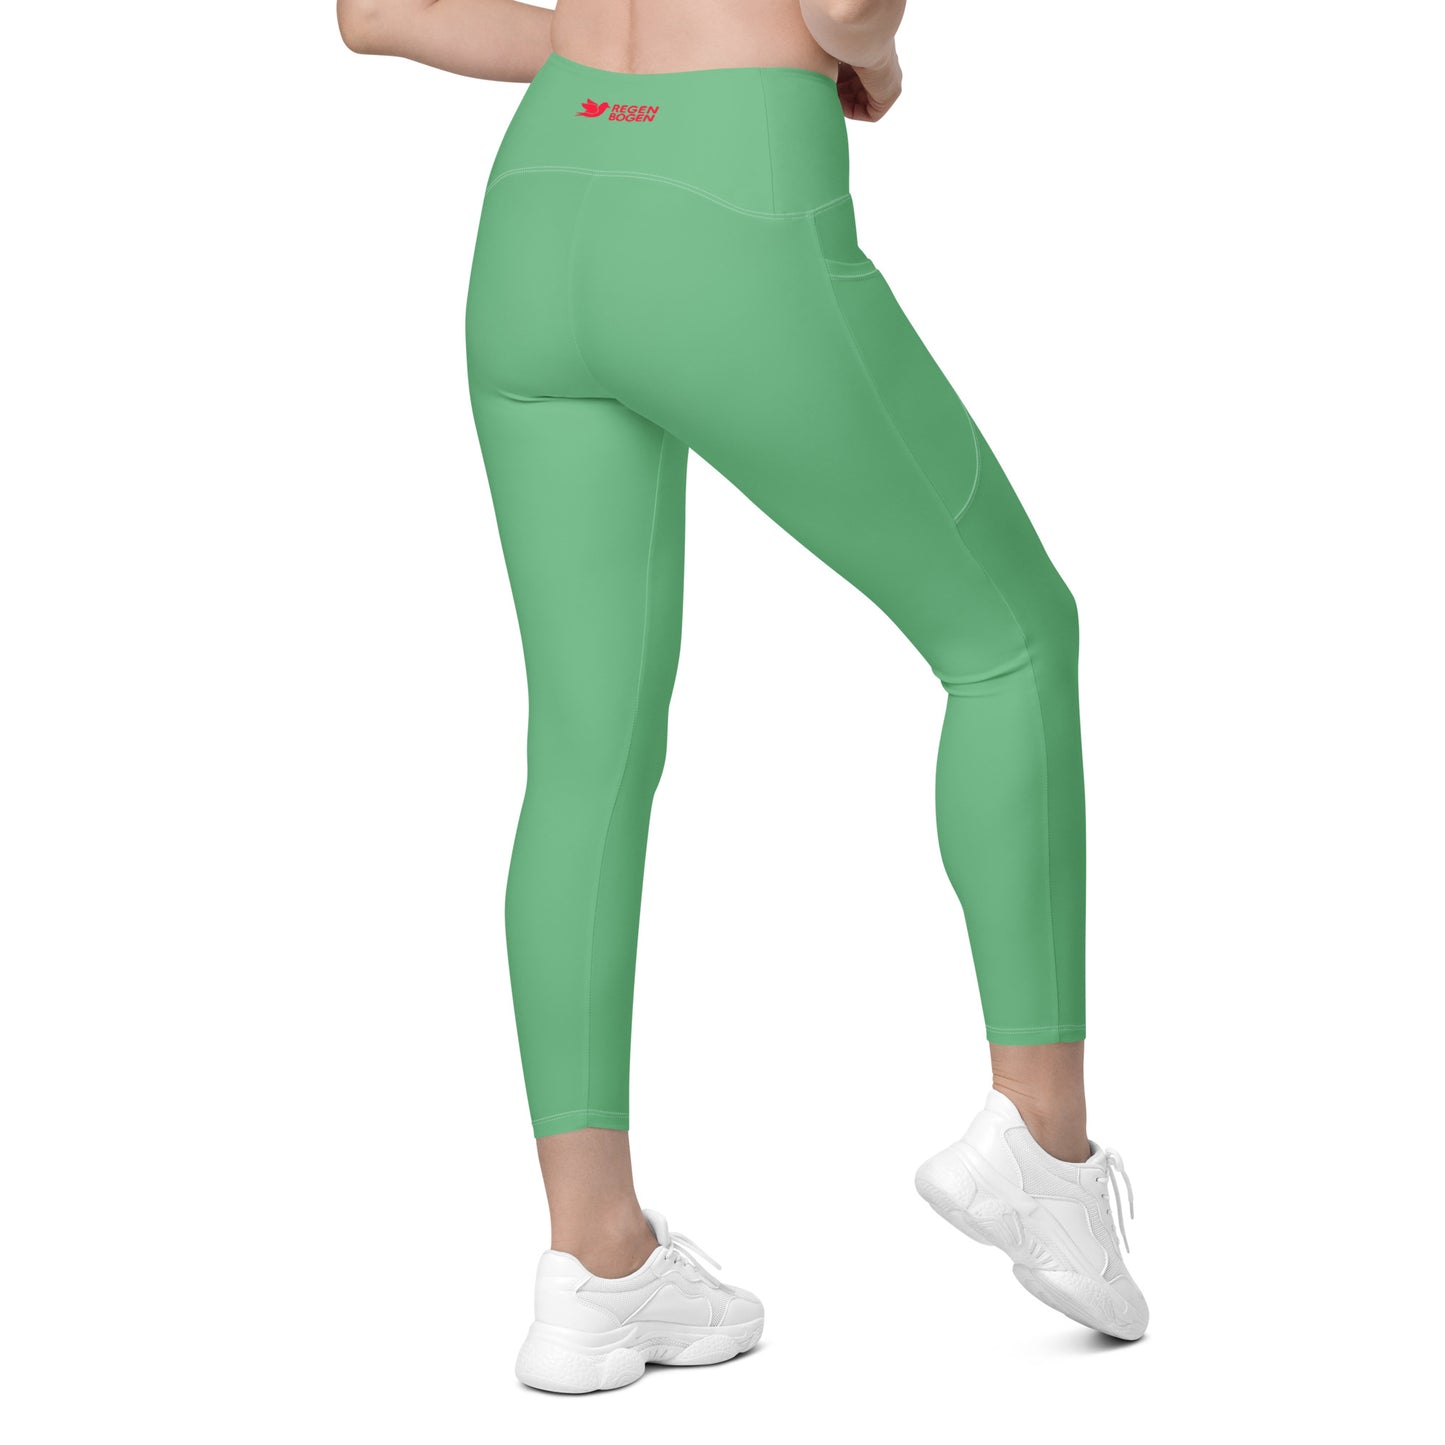 Marbella Solid Green High Waist 7/8 Recycled Yoga Leggings / Yoga Pants with Pockets